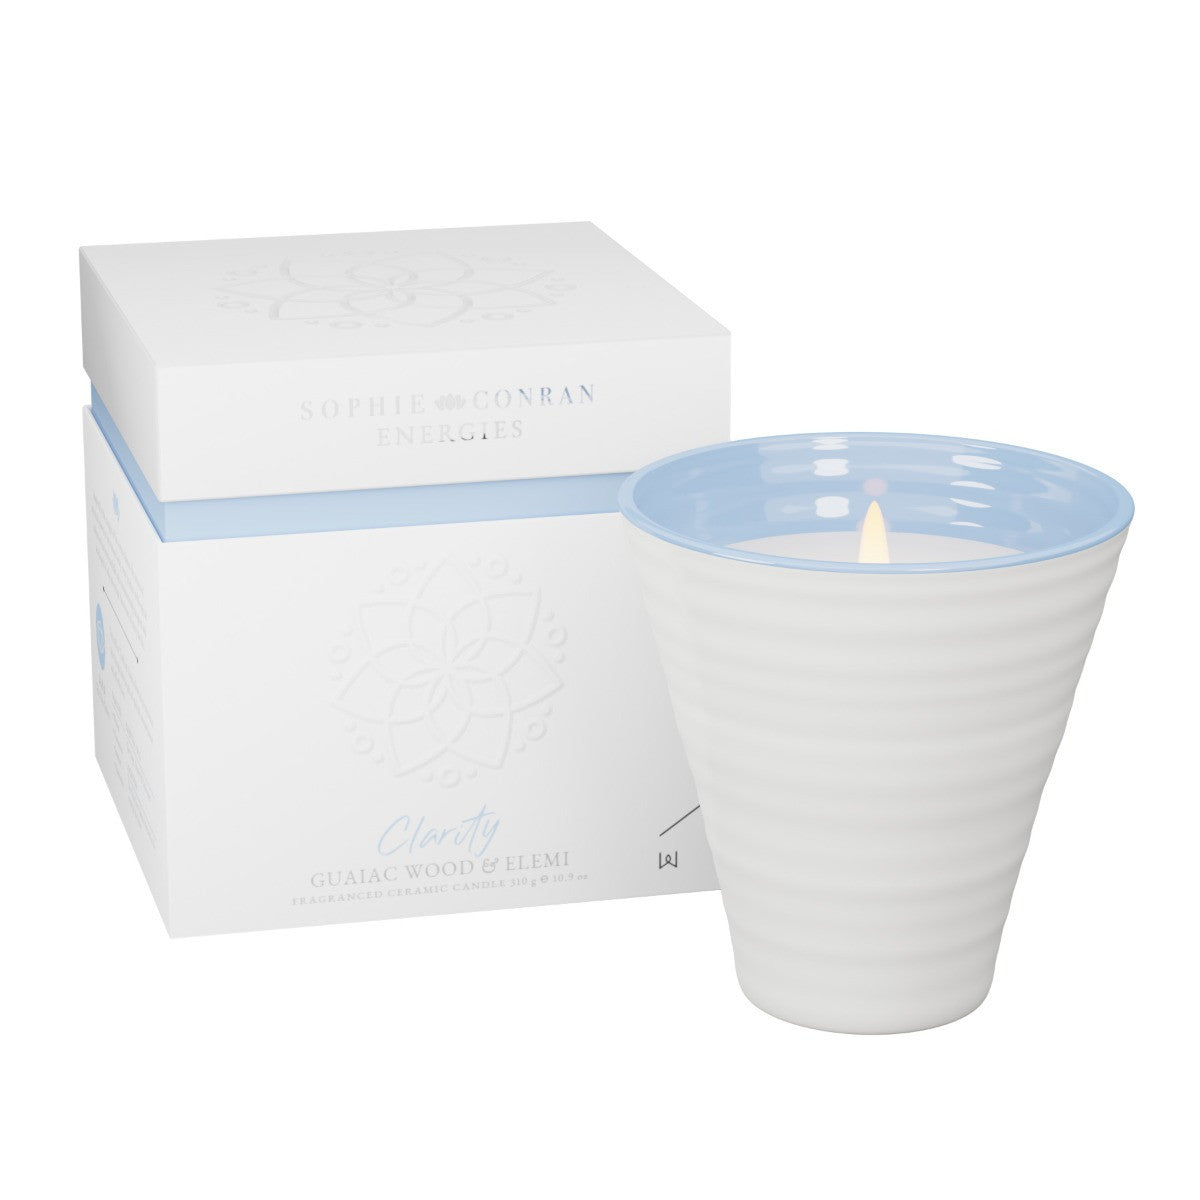 Sophie Conran Energies - Clarity Candle by Wax Lyrical. Made in England.